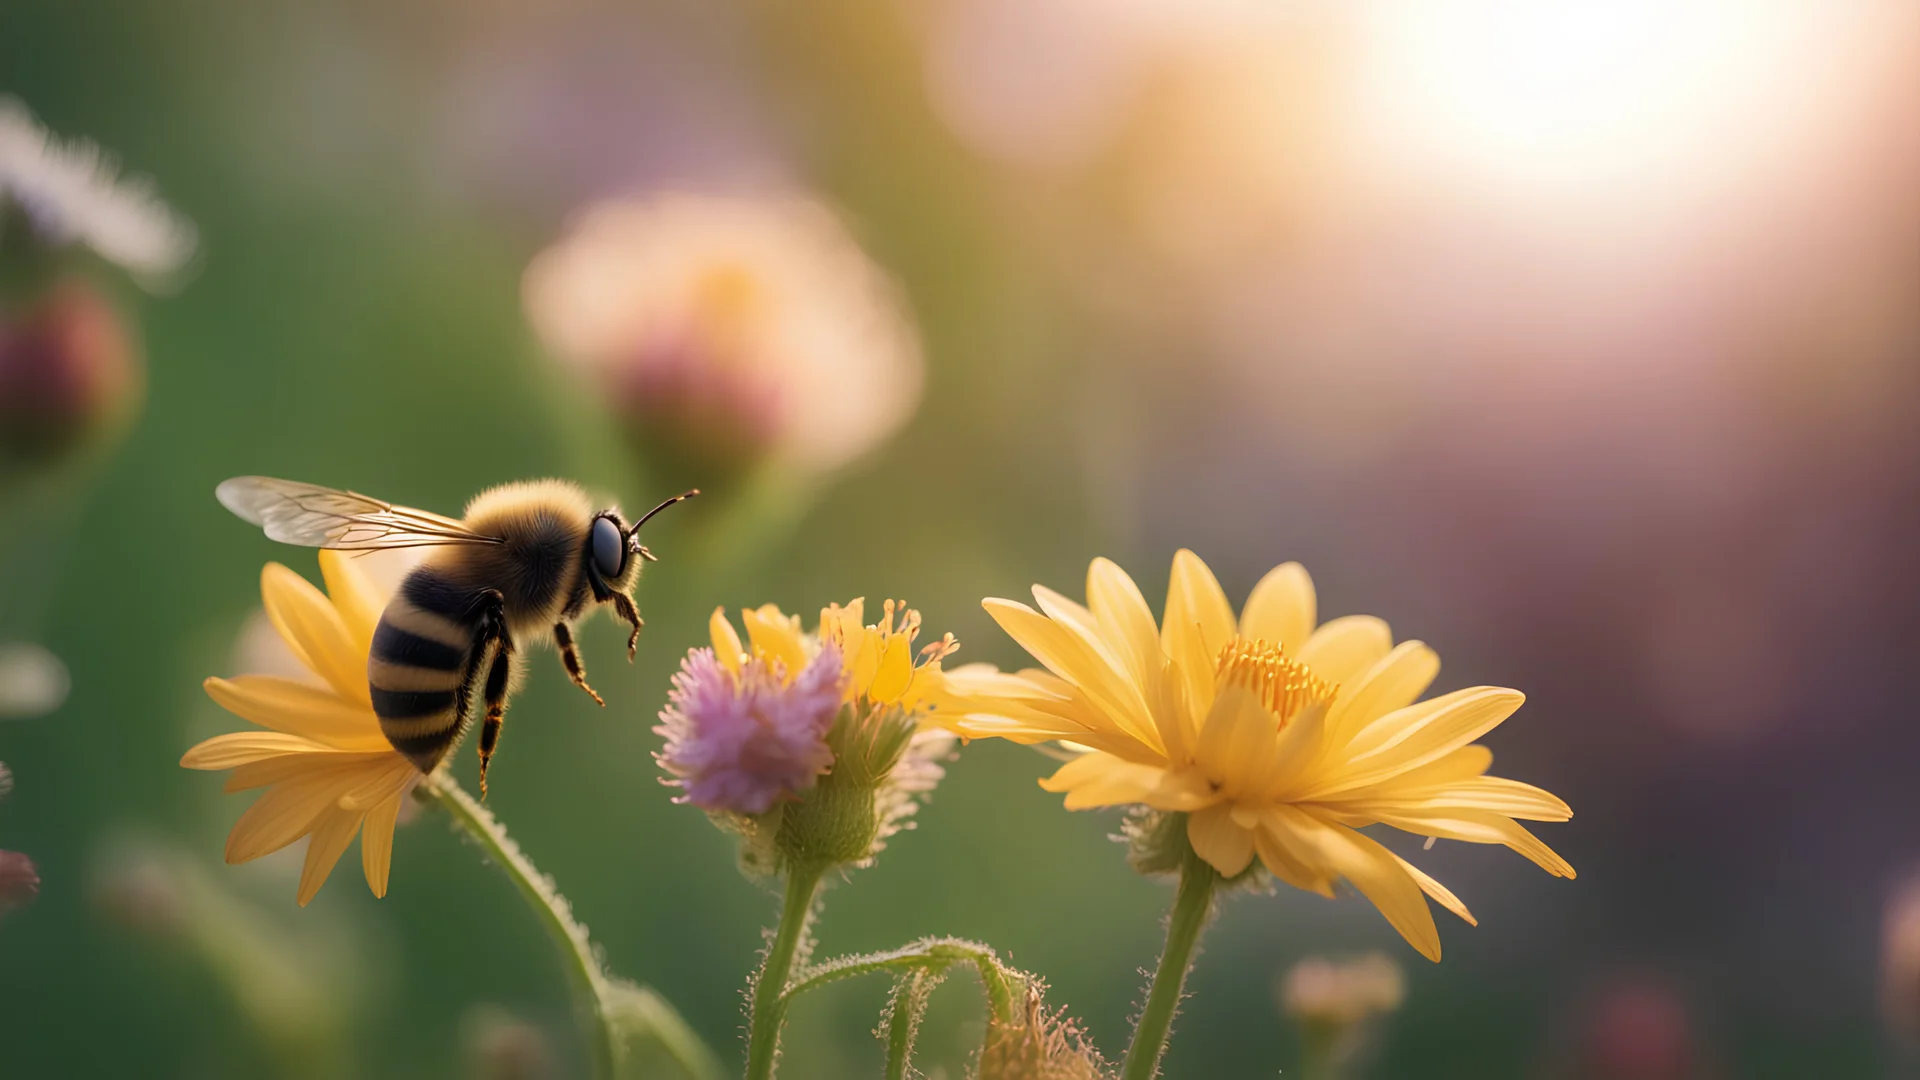 flowers in my garden, bee comes to find food. High resolution (4K or 8K), Golden hour light, Detailed textures